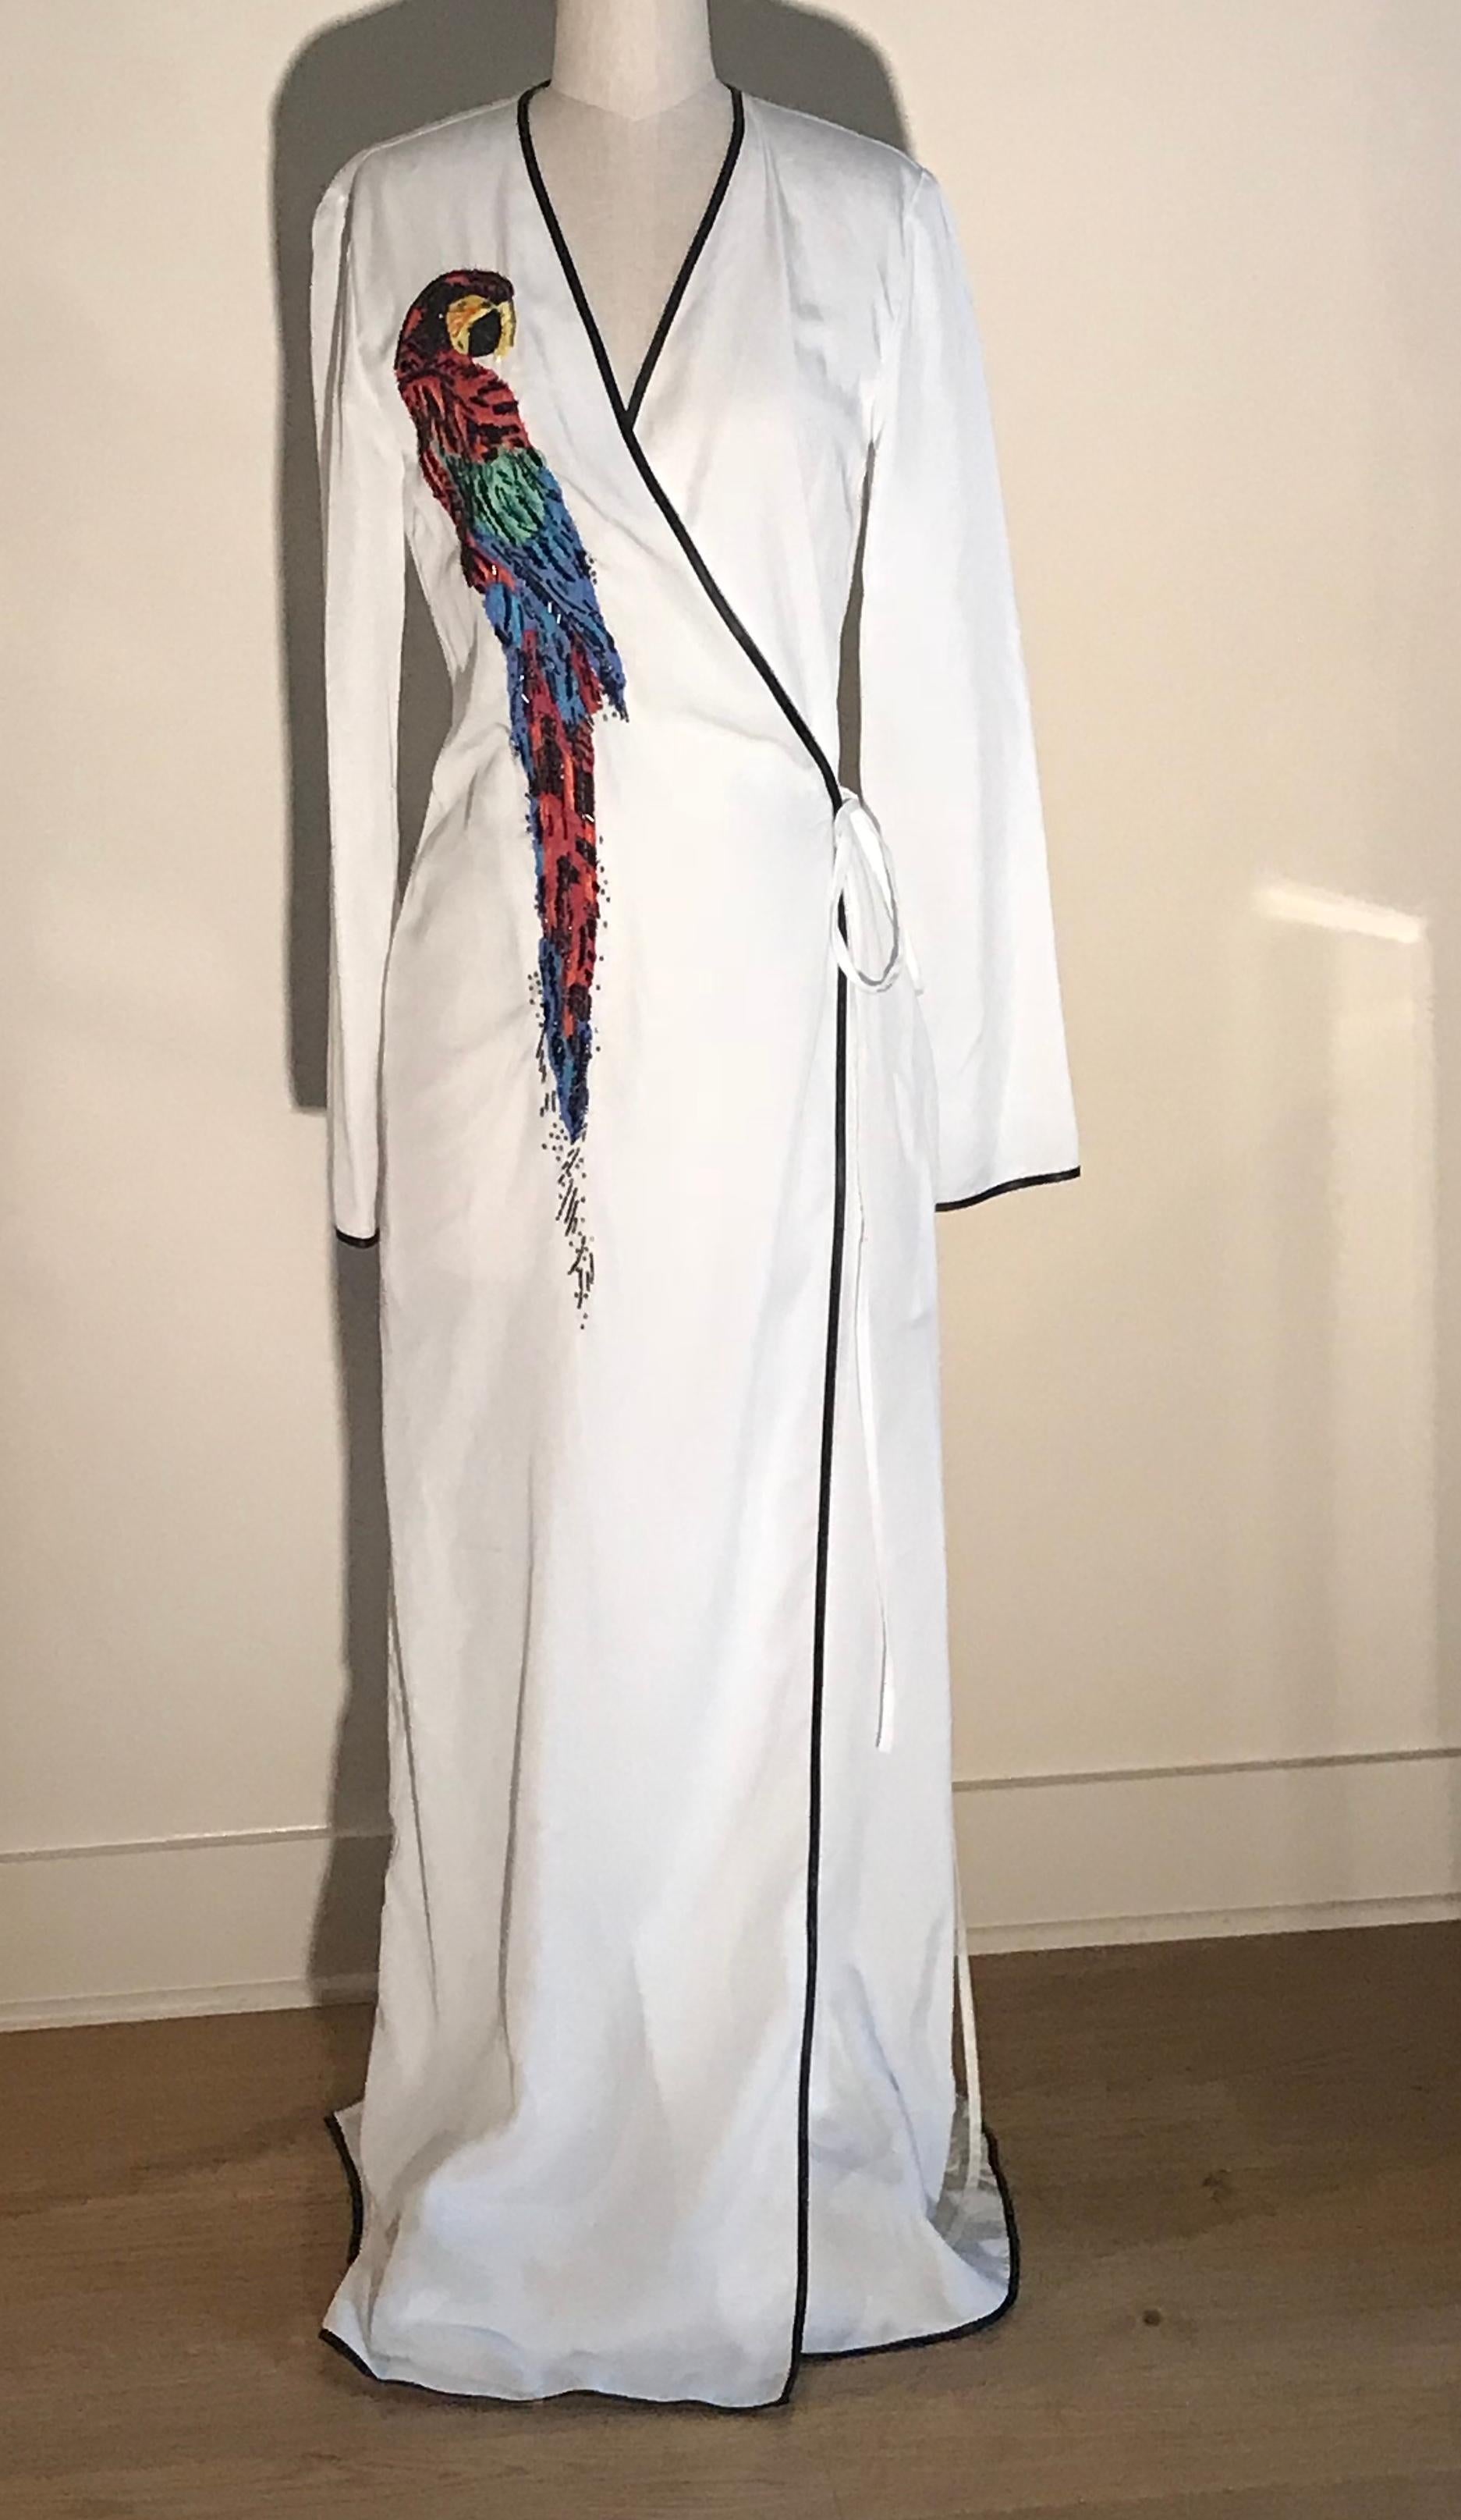 Attico long sleeved wrap dress with embellished parrot design and contrast trim. Large appliqué parrot with raw edges and embroidery and bead detail. Pockets at side seams, attached tie at waist, slit at back center. Looks great styled over a silk